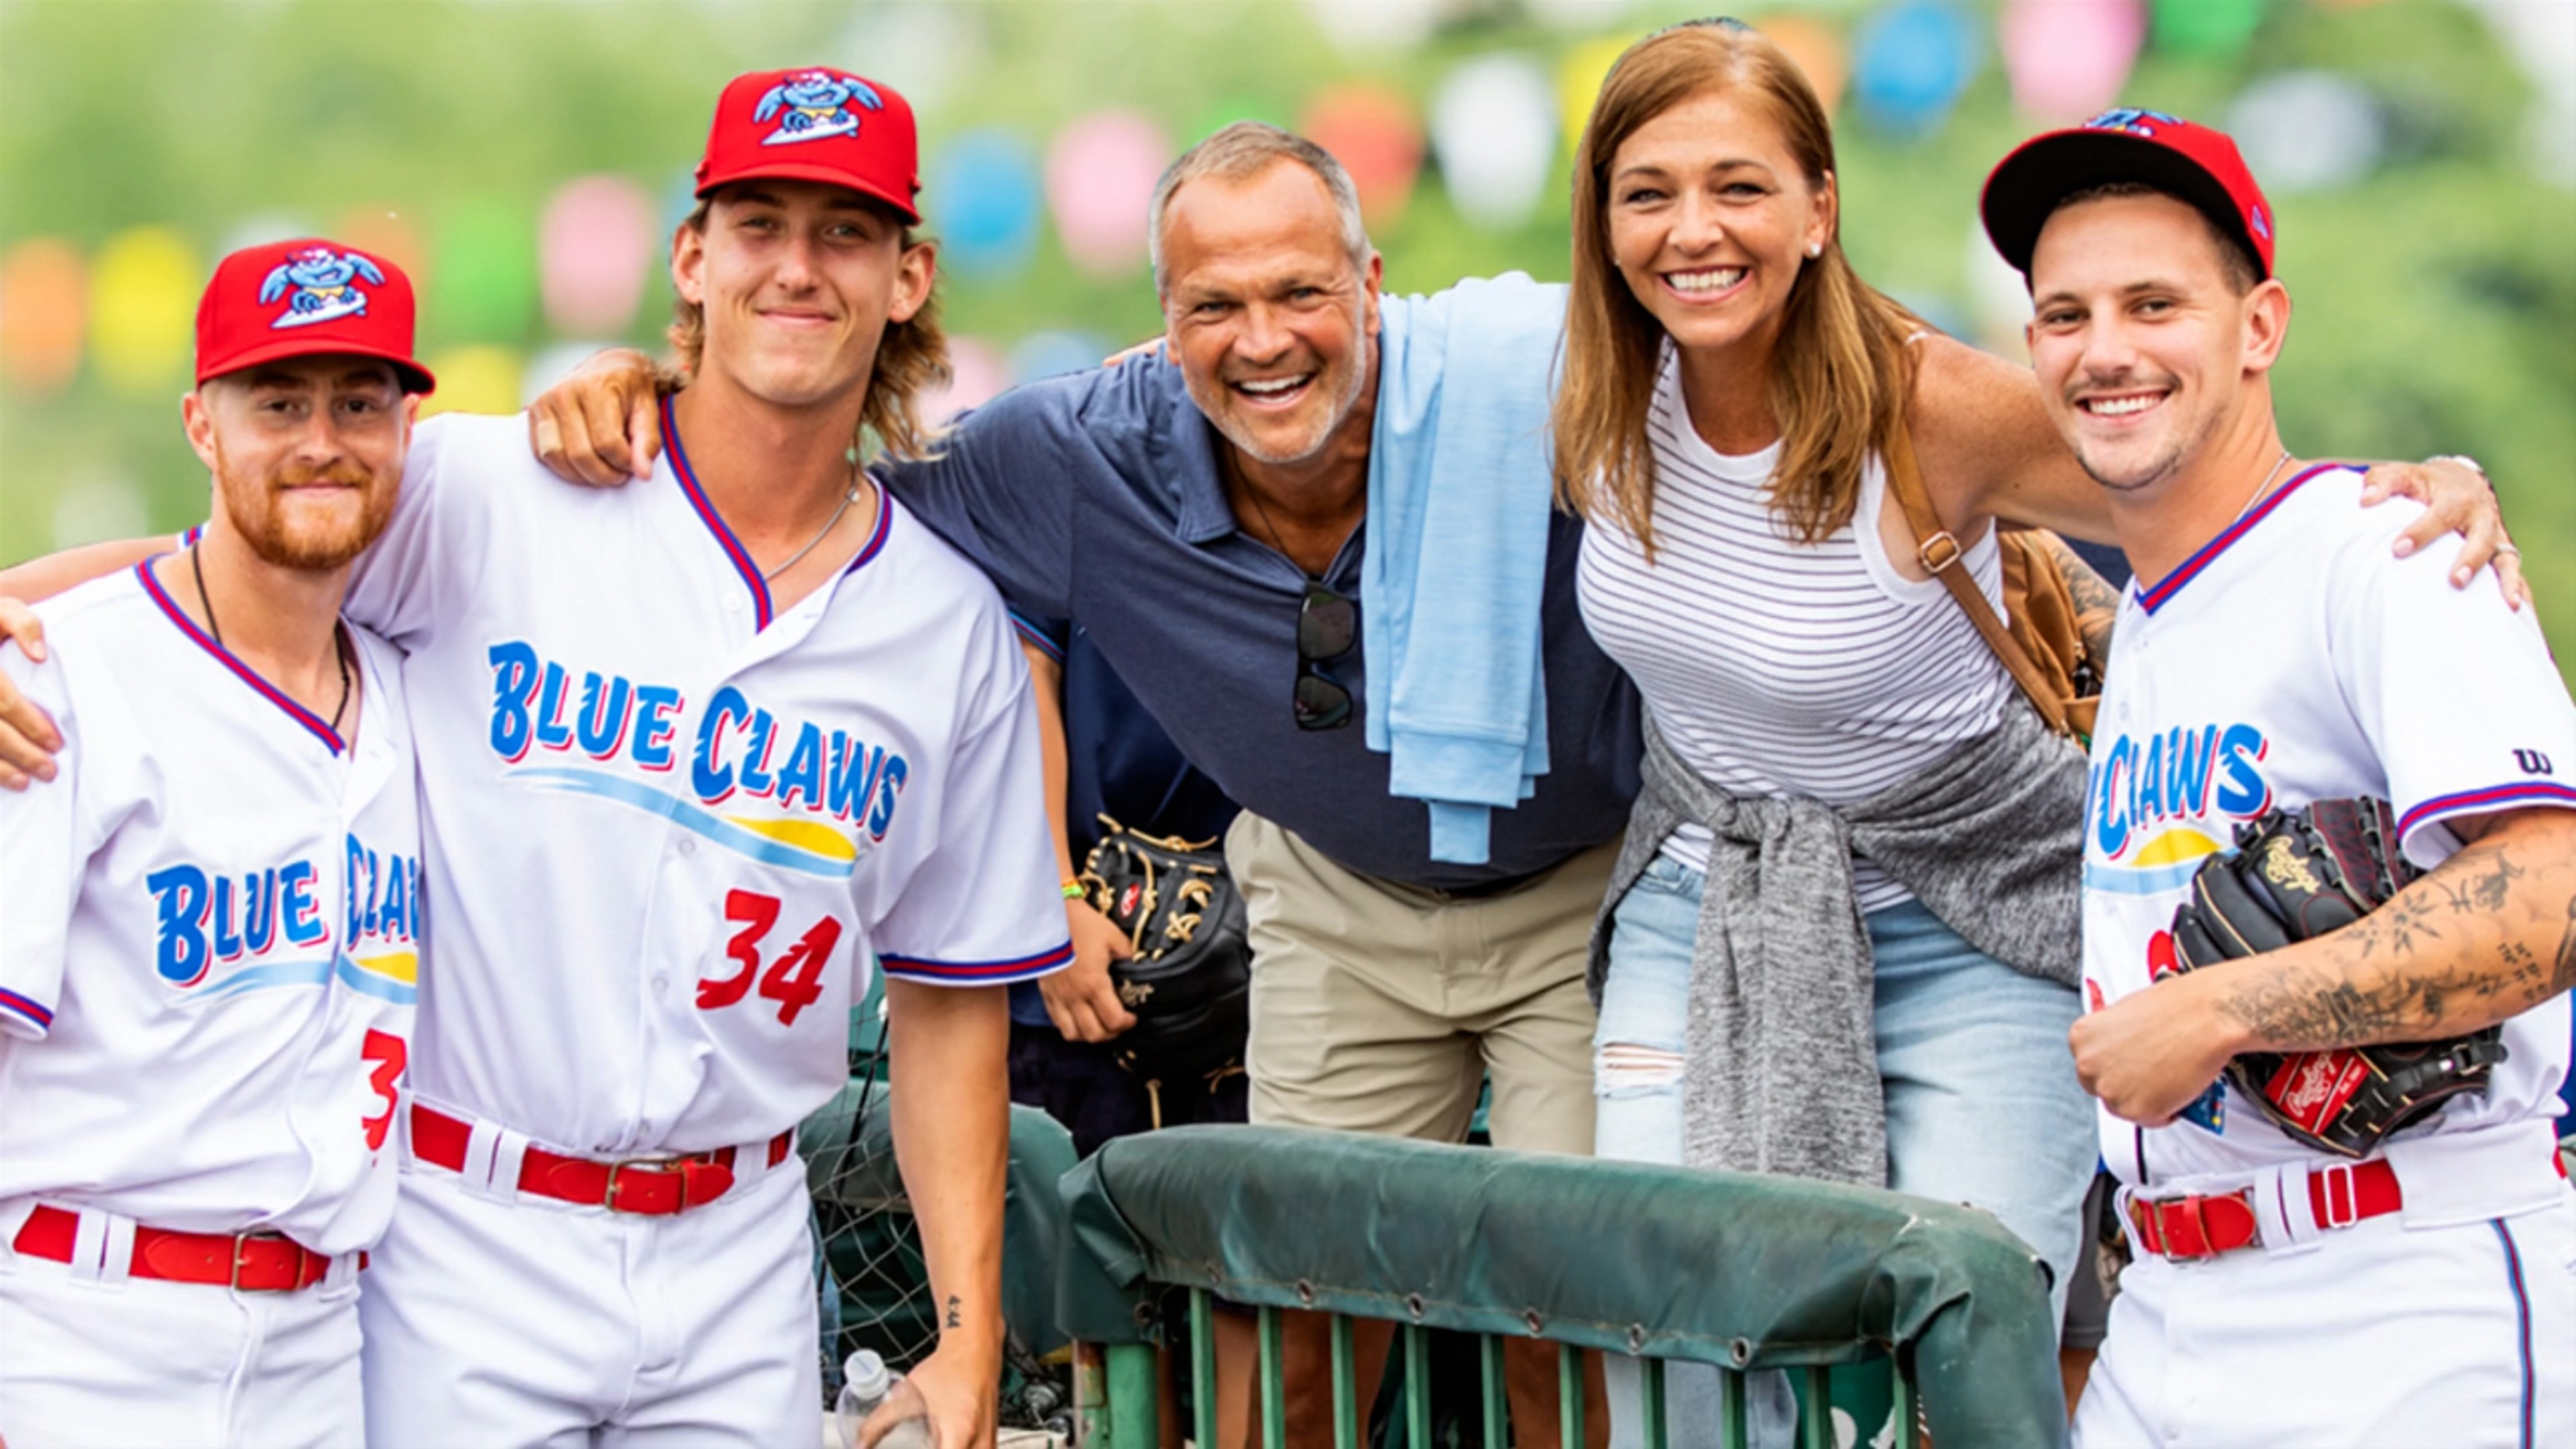 Family Fun Day With the BlueClaws, 01/27/2023